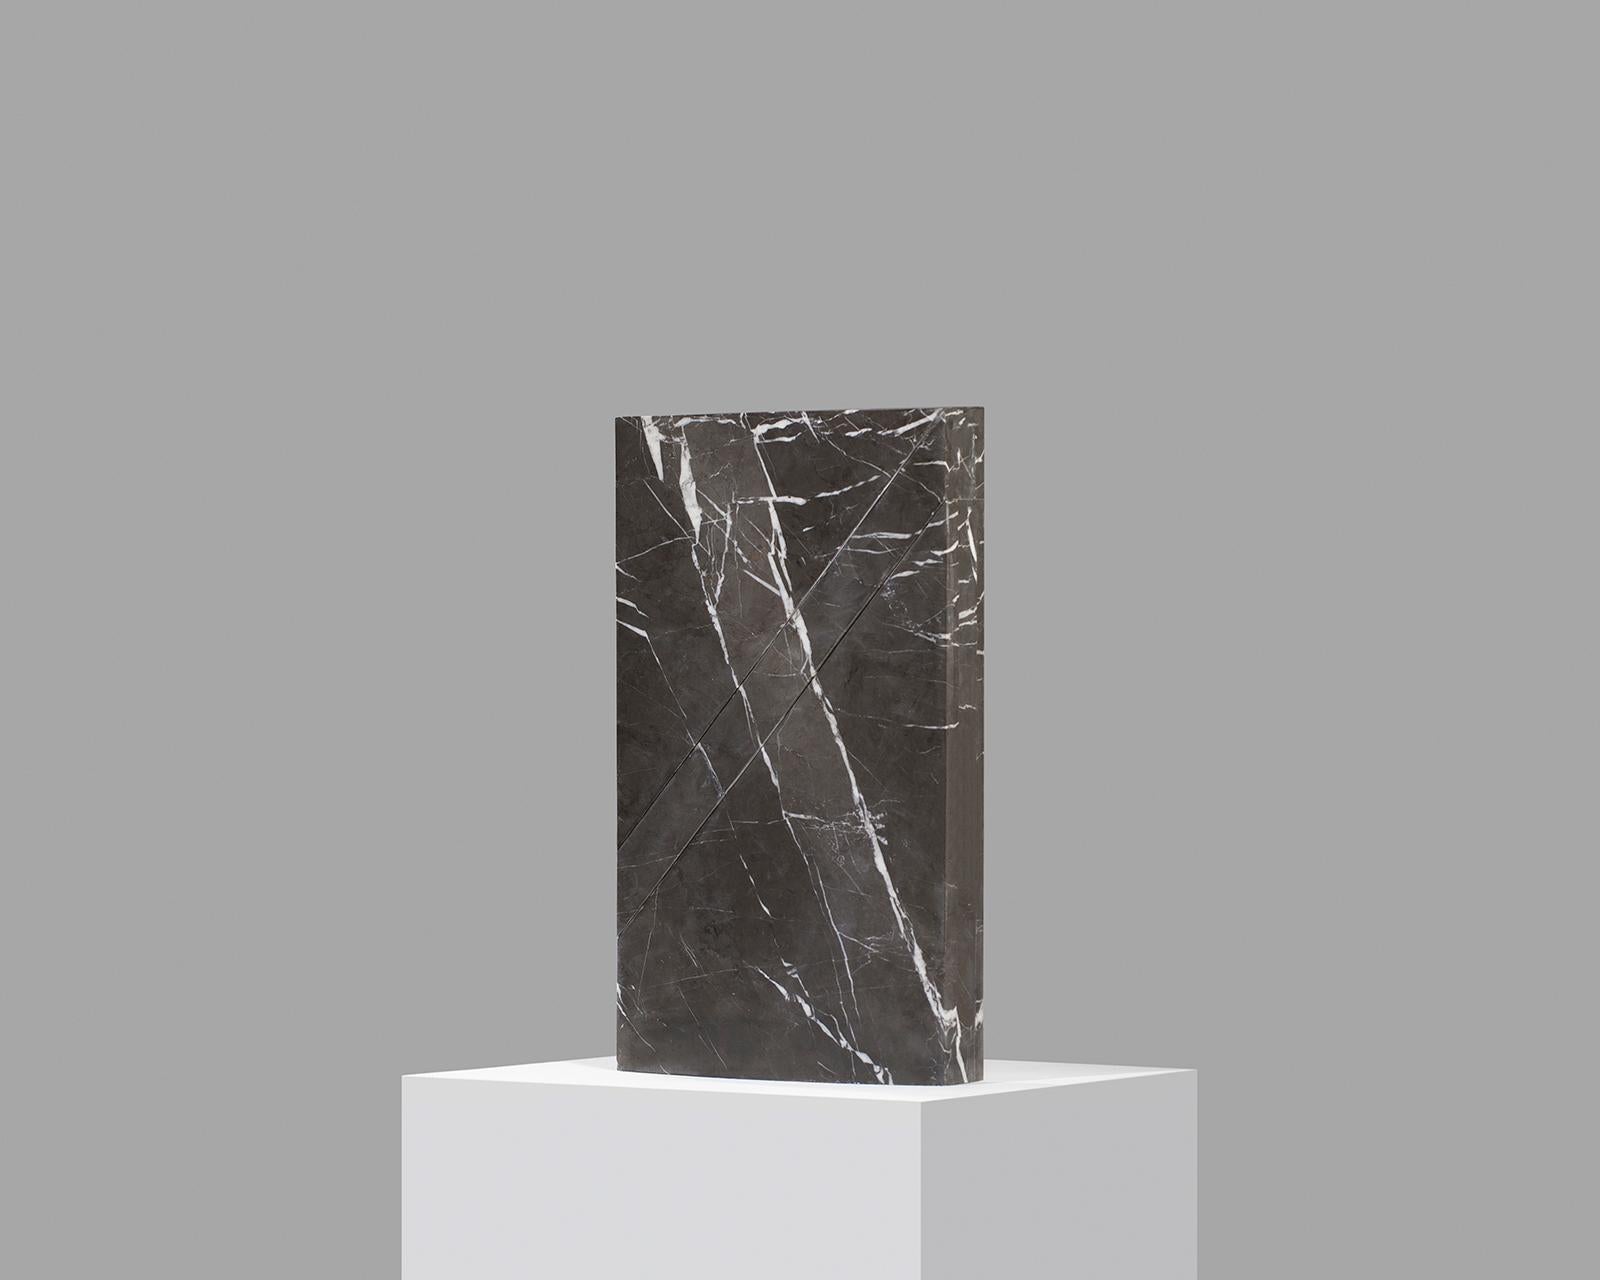 Doric marble table lamp by Carlos Aucejo
Dimensions: 44 x 25.5 x 9 cm 
(Exists also in large version 58 x 33.6 x 11.8 cm) 
Materials: Pietra Grey Marble

Iceberg
It is a functional sculpture made with Pietra Grey (Iranian marble). The piece is